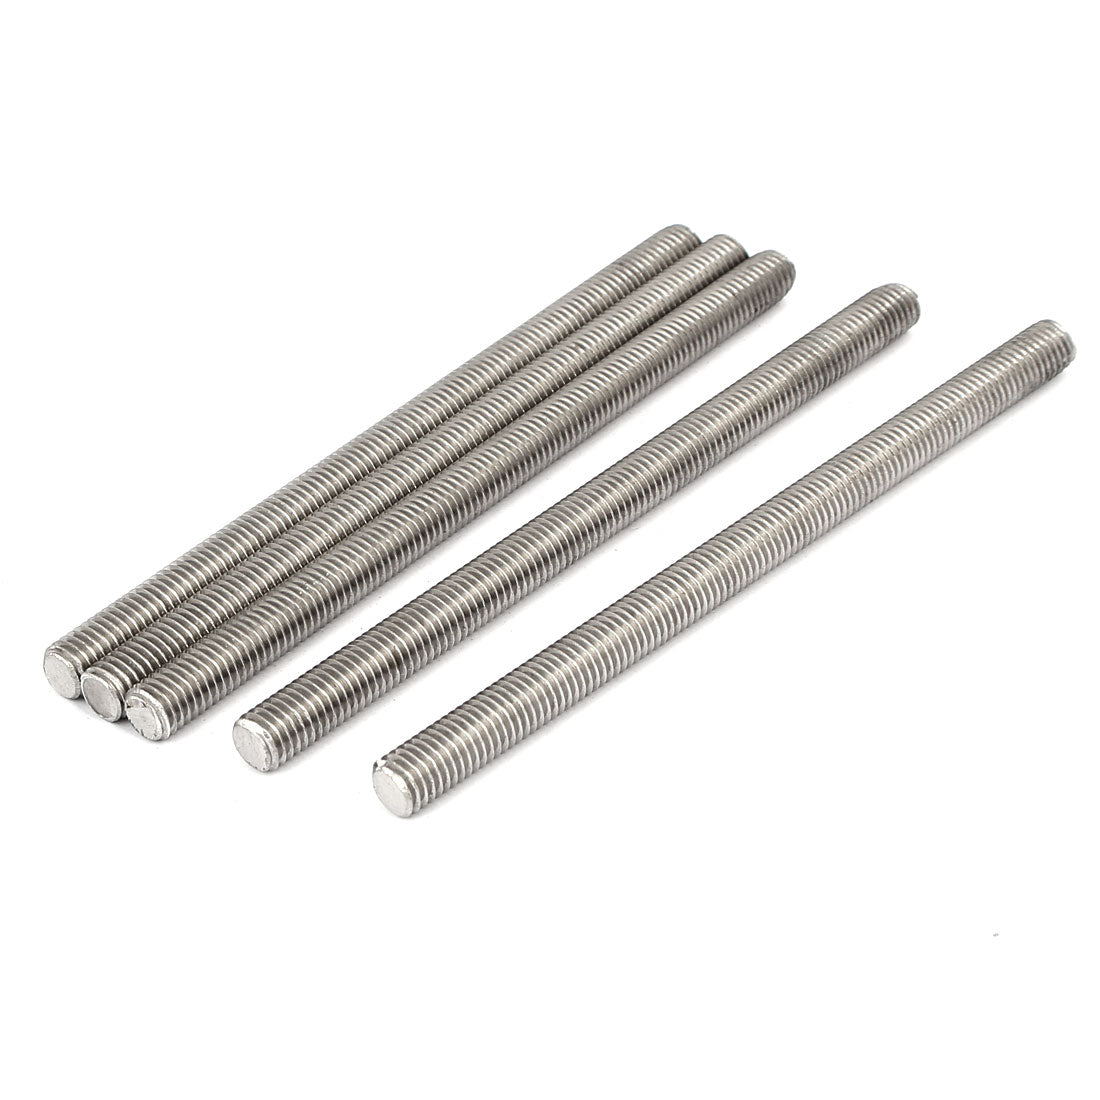 uxcell Uxcell M8 x 130mm 304 Stainless Steel Fully Threaded Rods Fasteners Silver Tone 5 Pcs